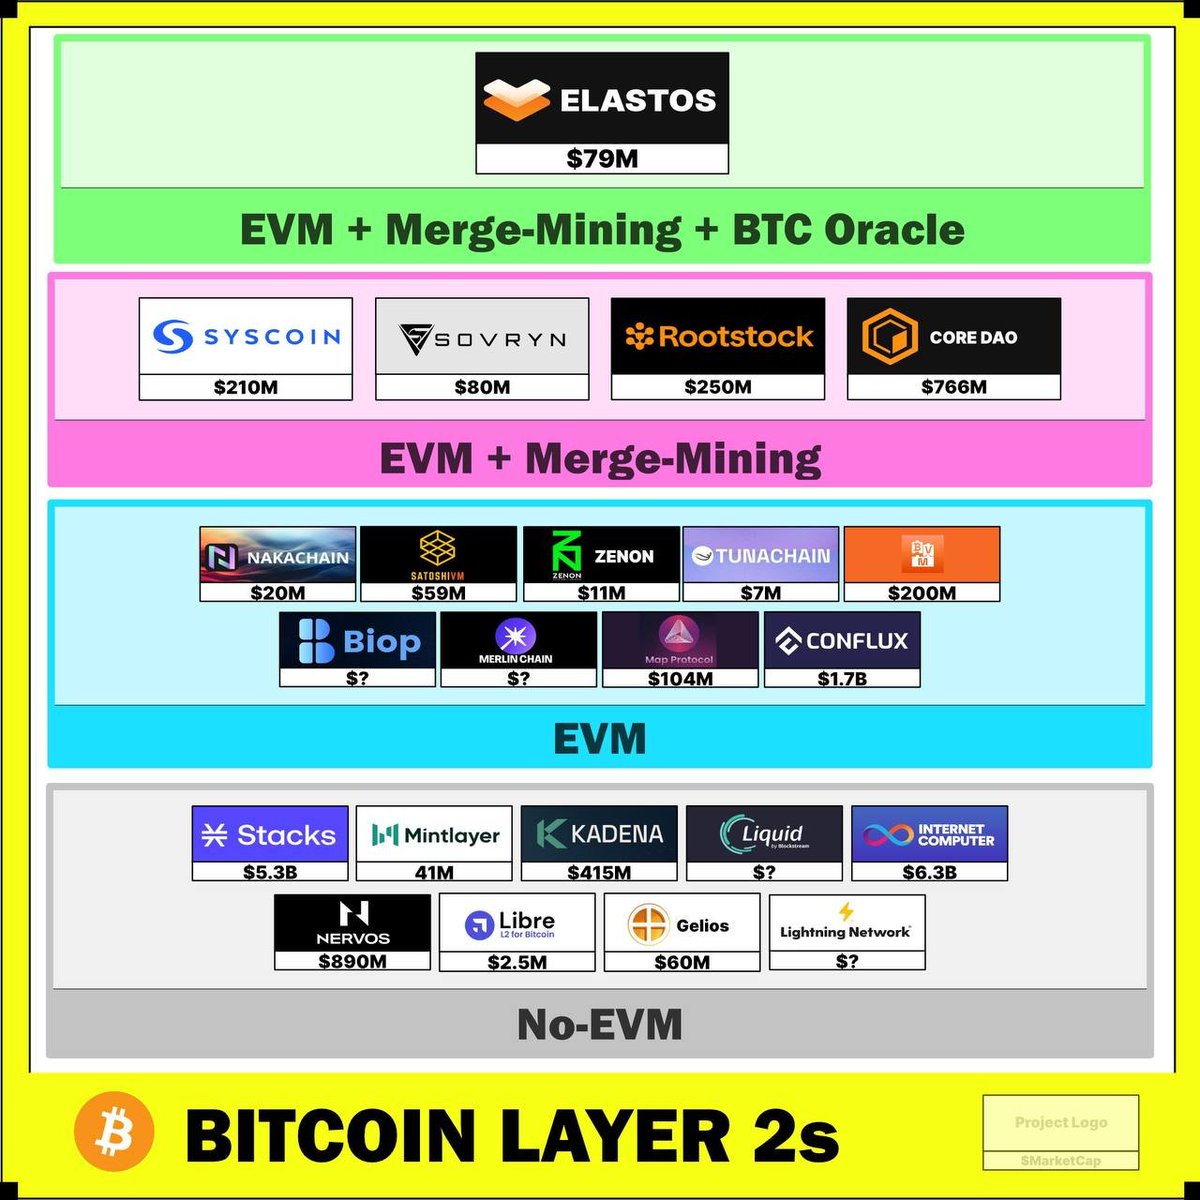 @DanielA81545064 @OrangDx_BRC20 @VelarBTC @SatoshiSync $ELA is a about to wake up! @Be_Layer2 is not just another #BTC #L2 , it is going to implement a BTC Oracle able to connect #BTC to every #EVM compatible blockchain and is secured by more than 50% of BTC hashpower through merge-mining. Don't sleep on #Elastos!